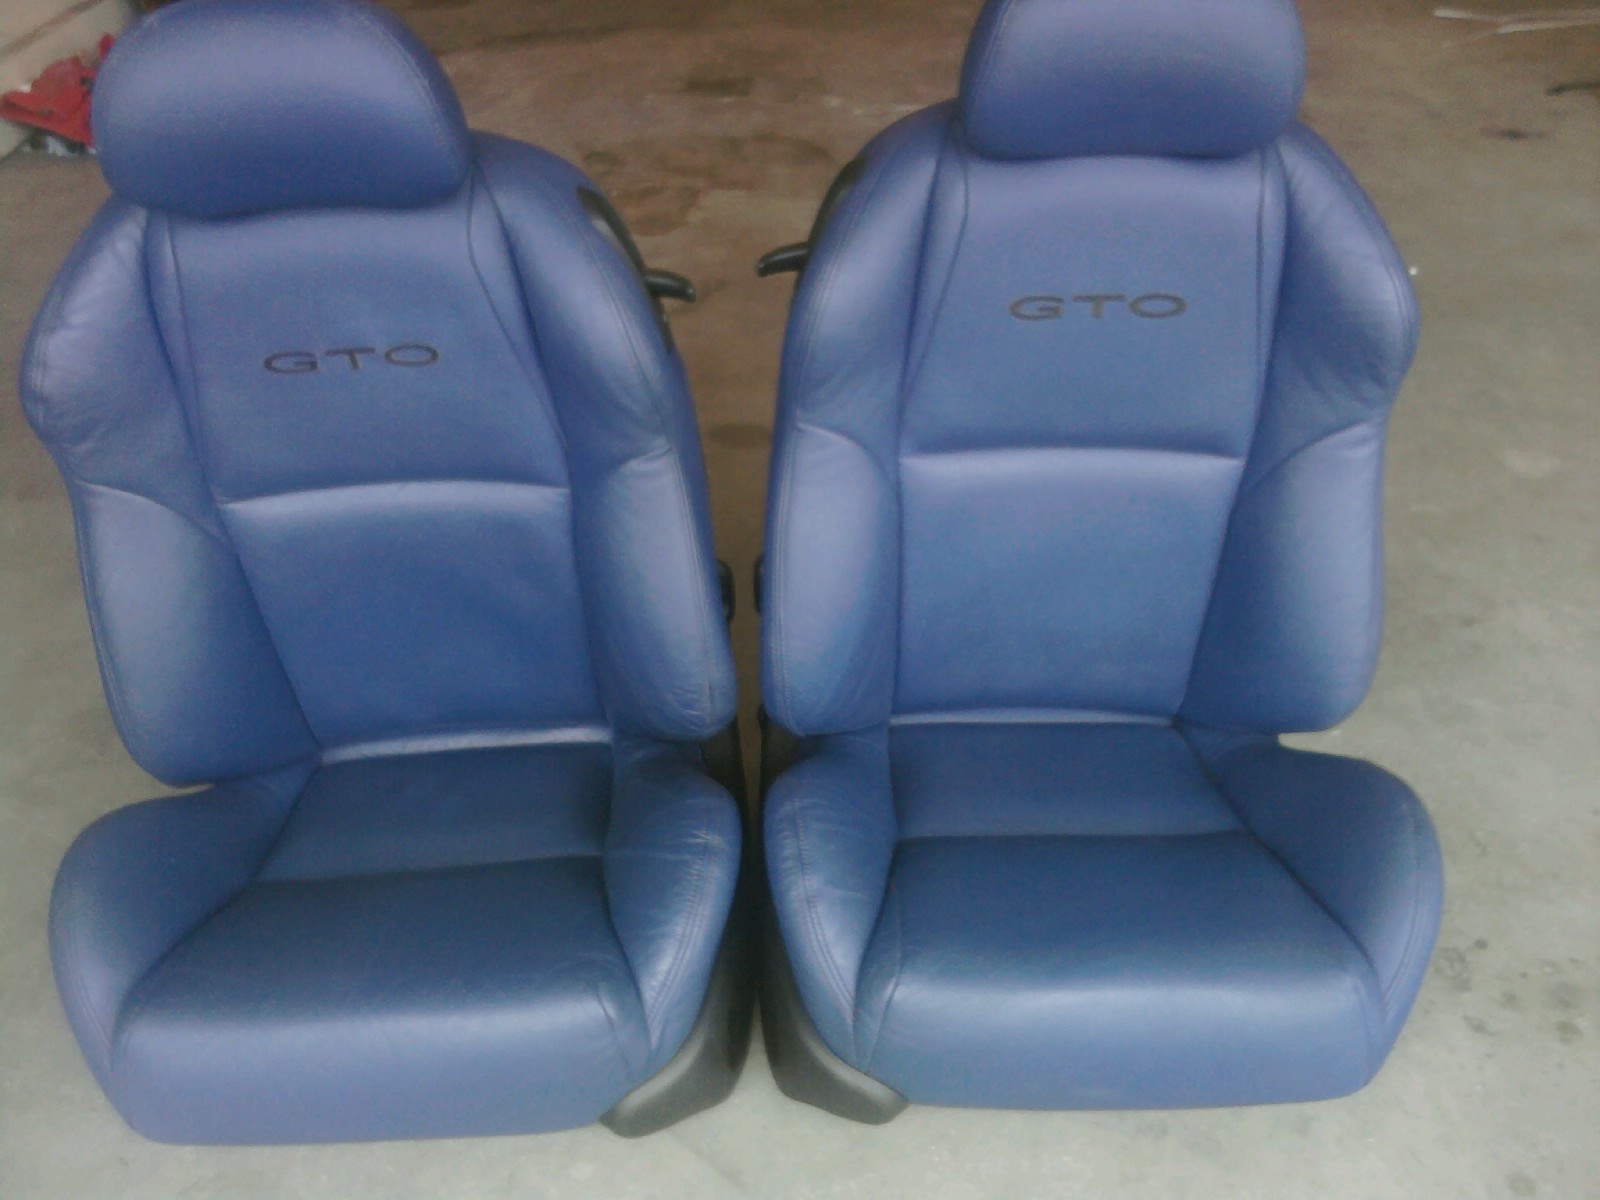 GTO BLUE SEATS - From my 2006 GTO with low miles - LS1TECH - Camaro and